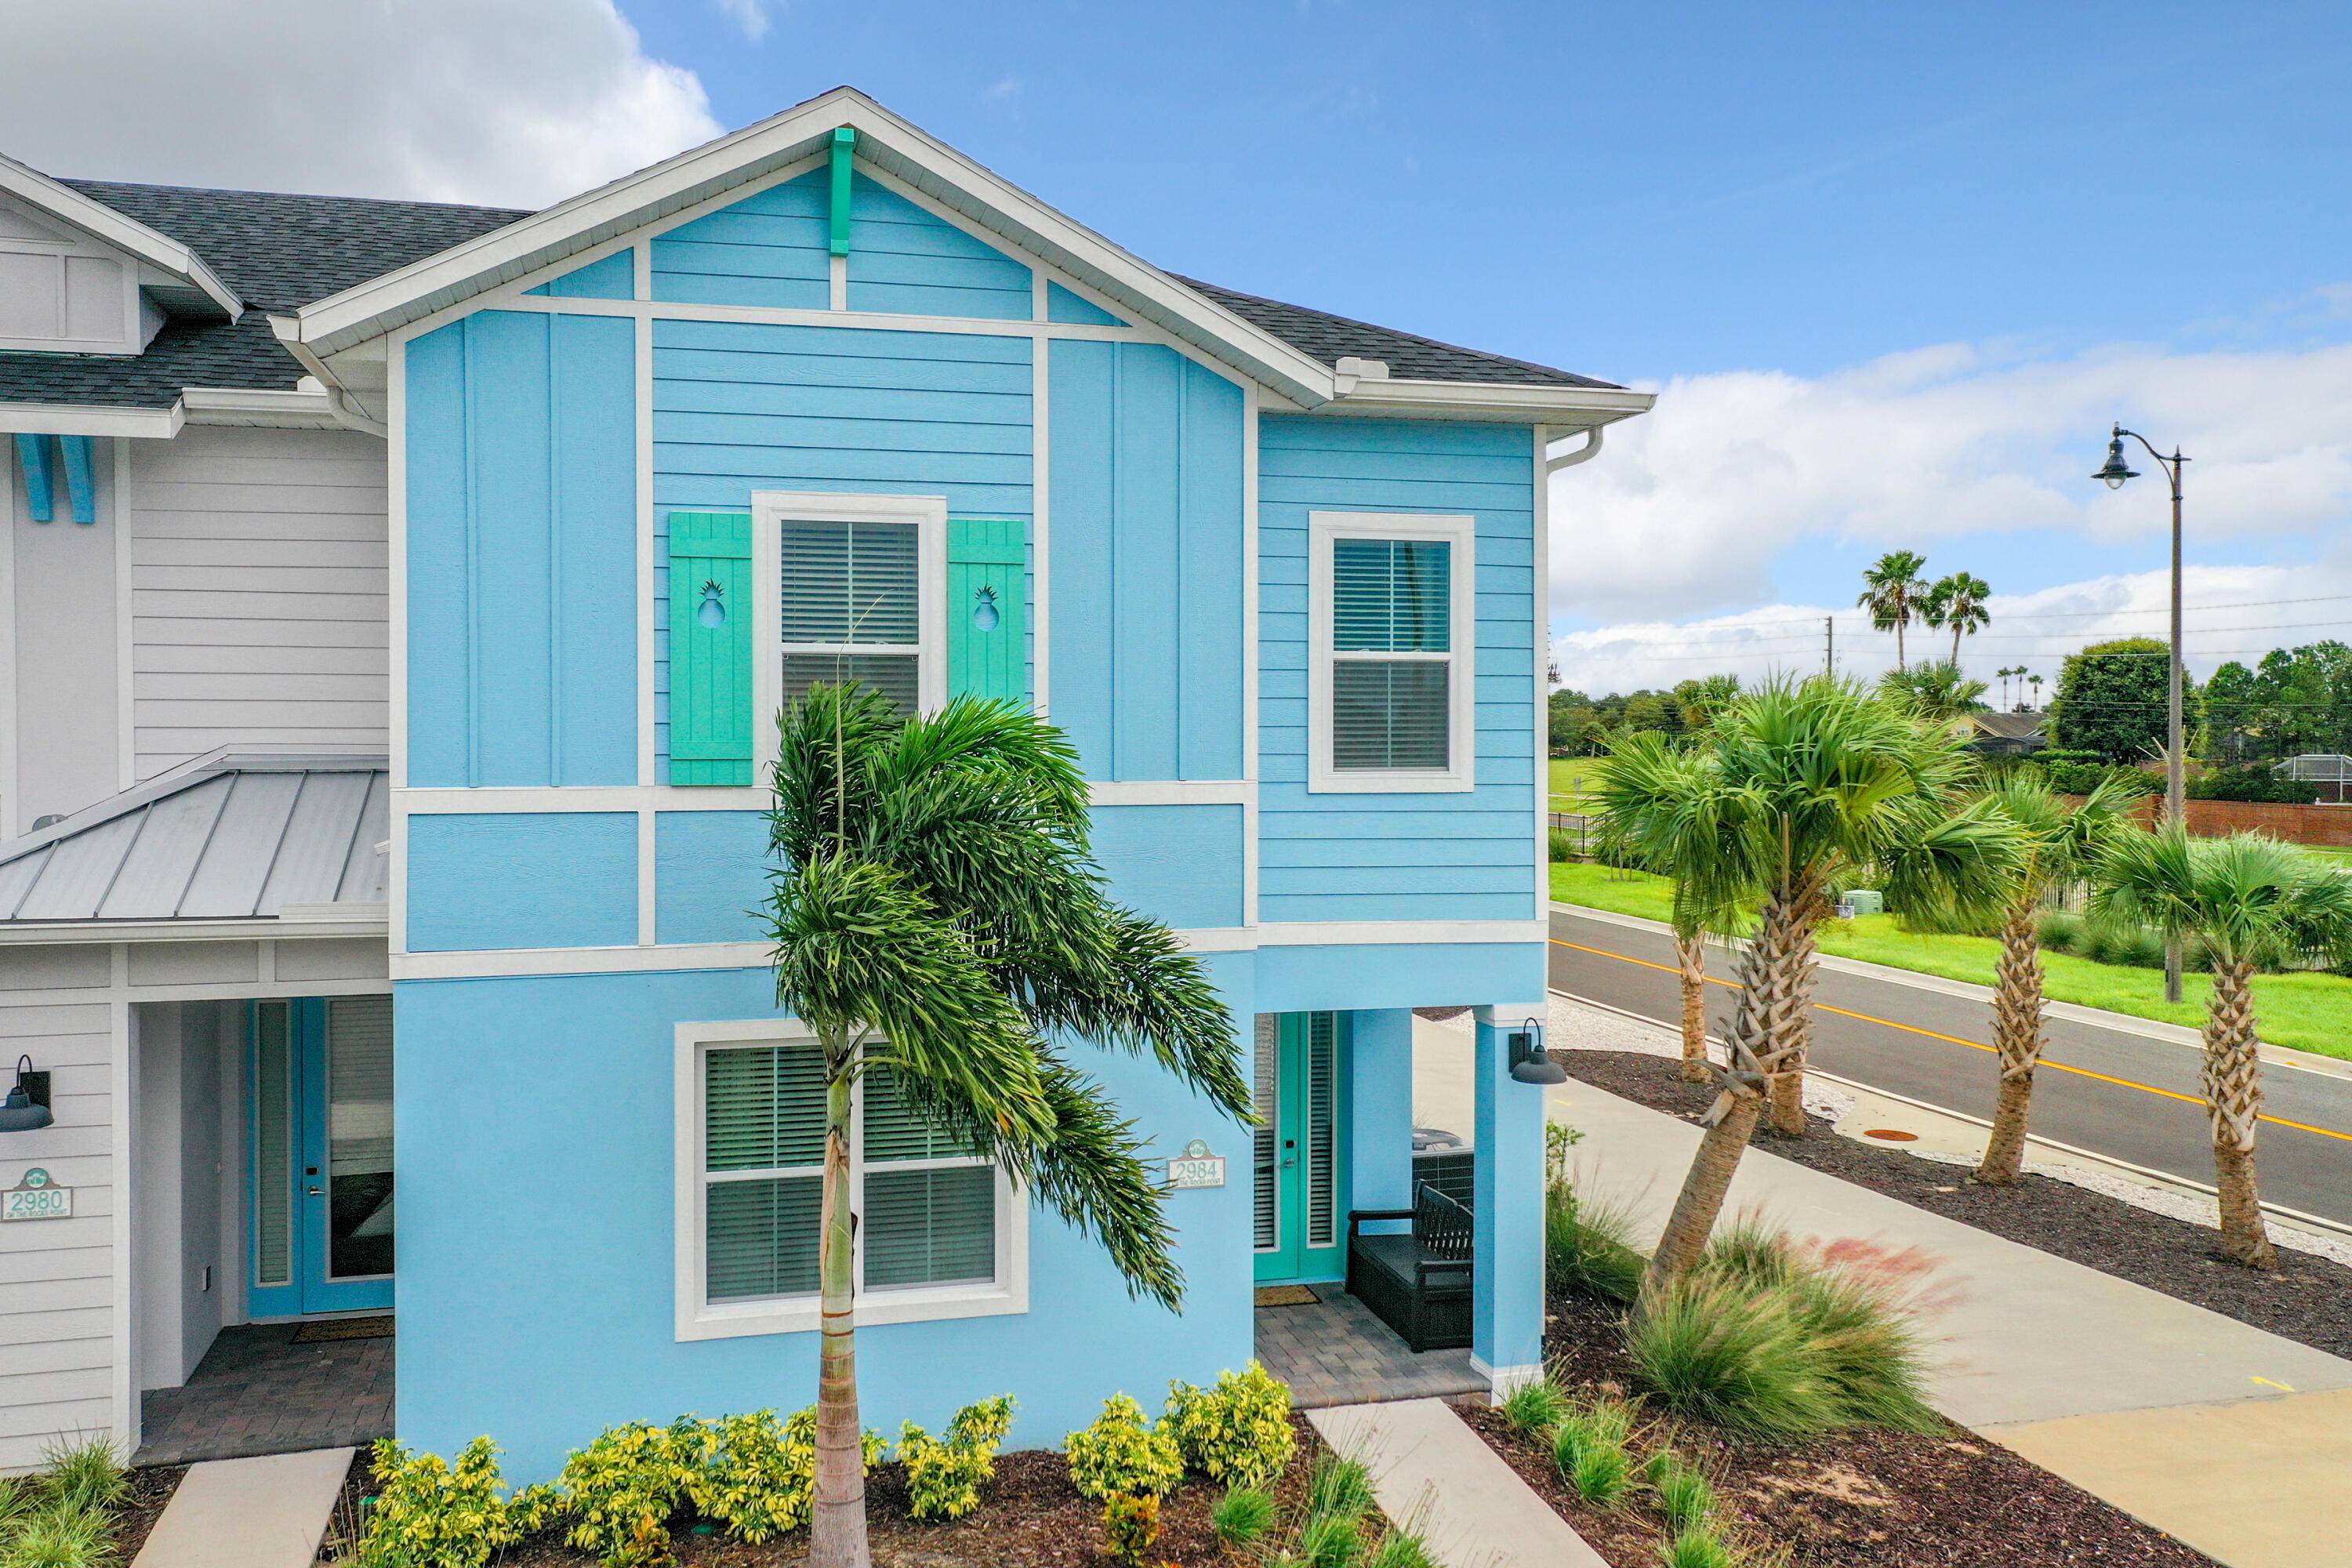 This impressive 4 bed, 3 bath villa in Margaritaville Resort, just 10 minutes from Disney, boasts a prime corner location near the pool.